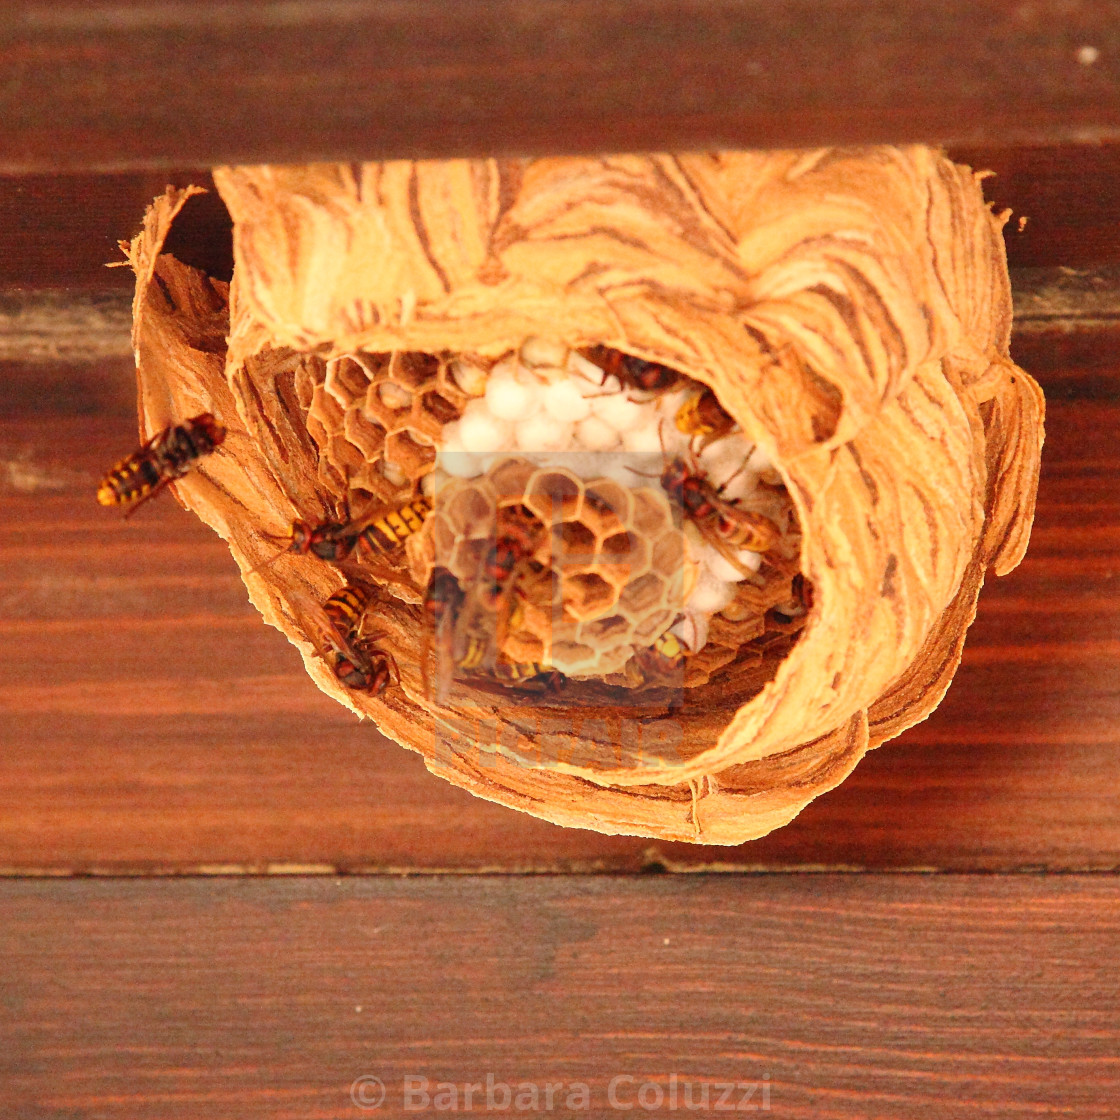 "A wasps’ nest" stock image